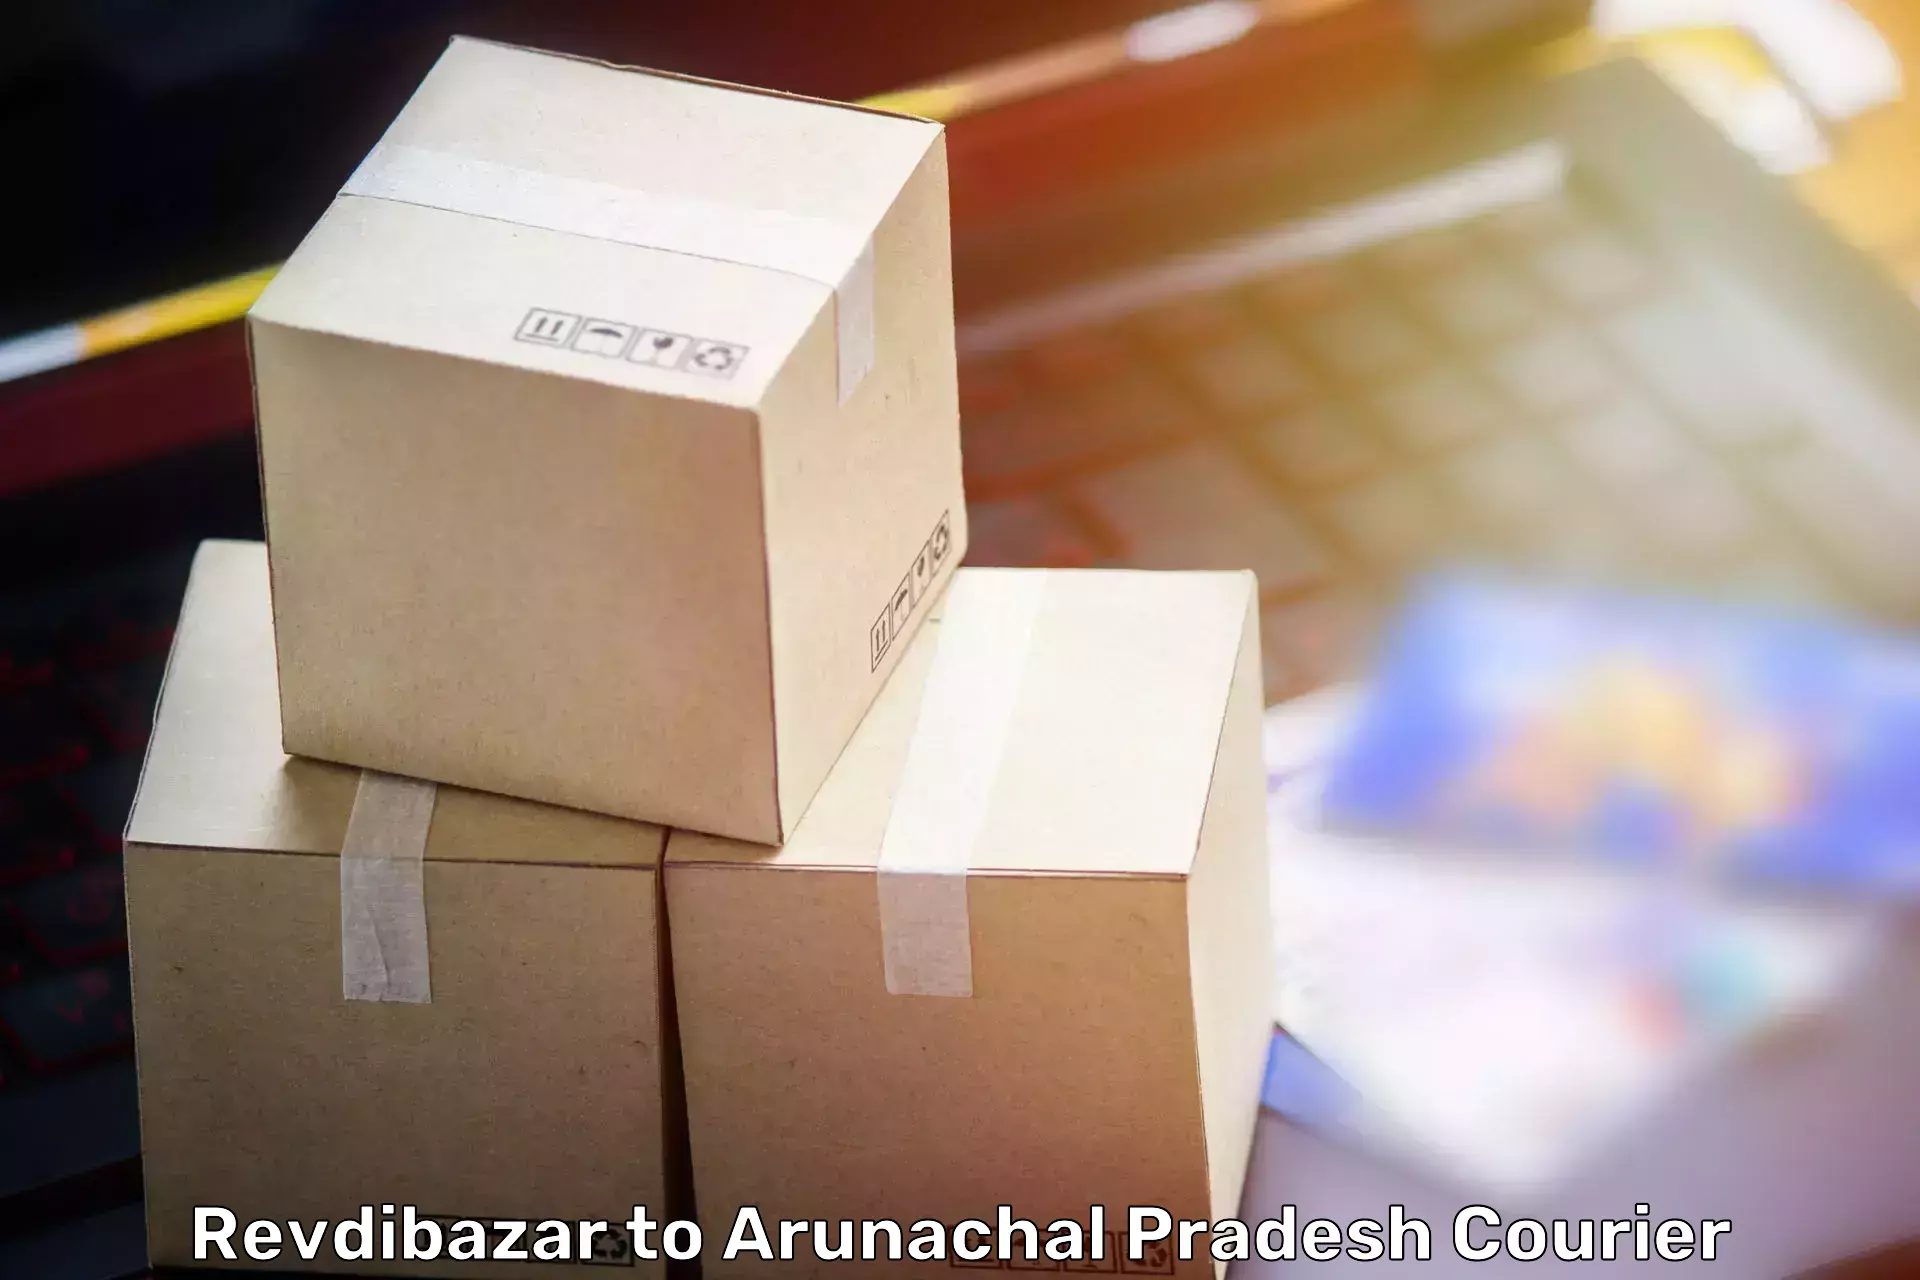 Professional movers Revdibazar to Aalo